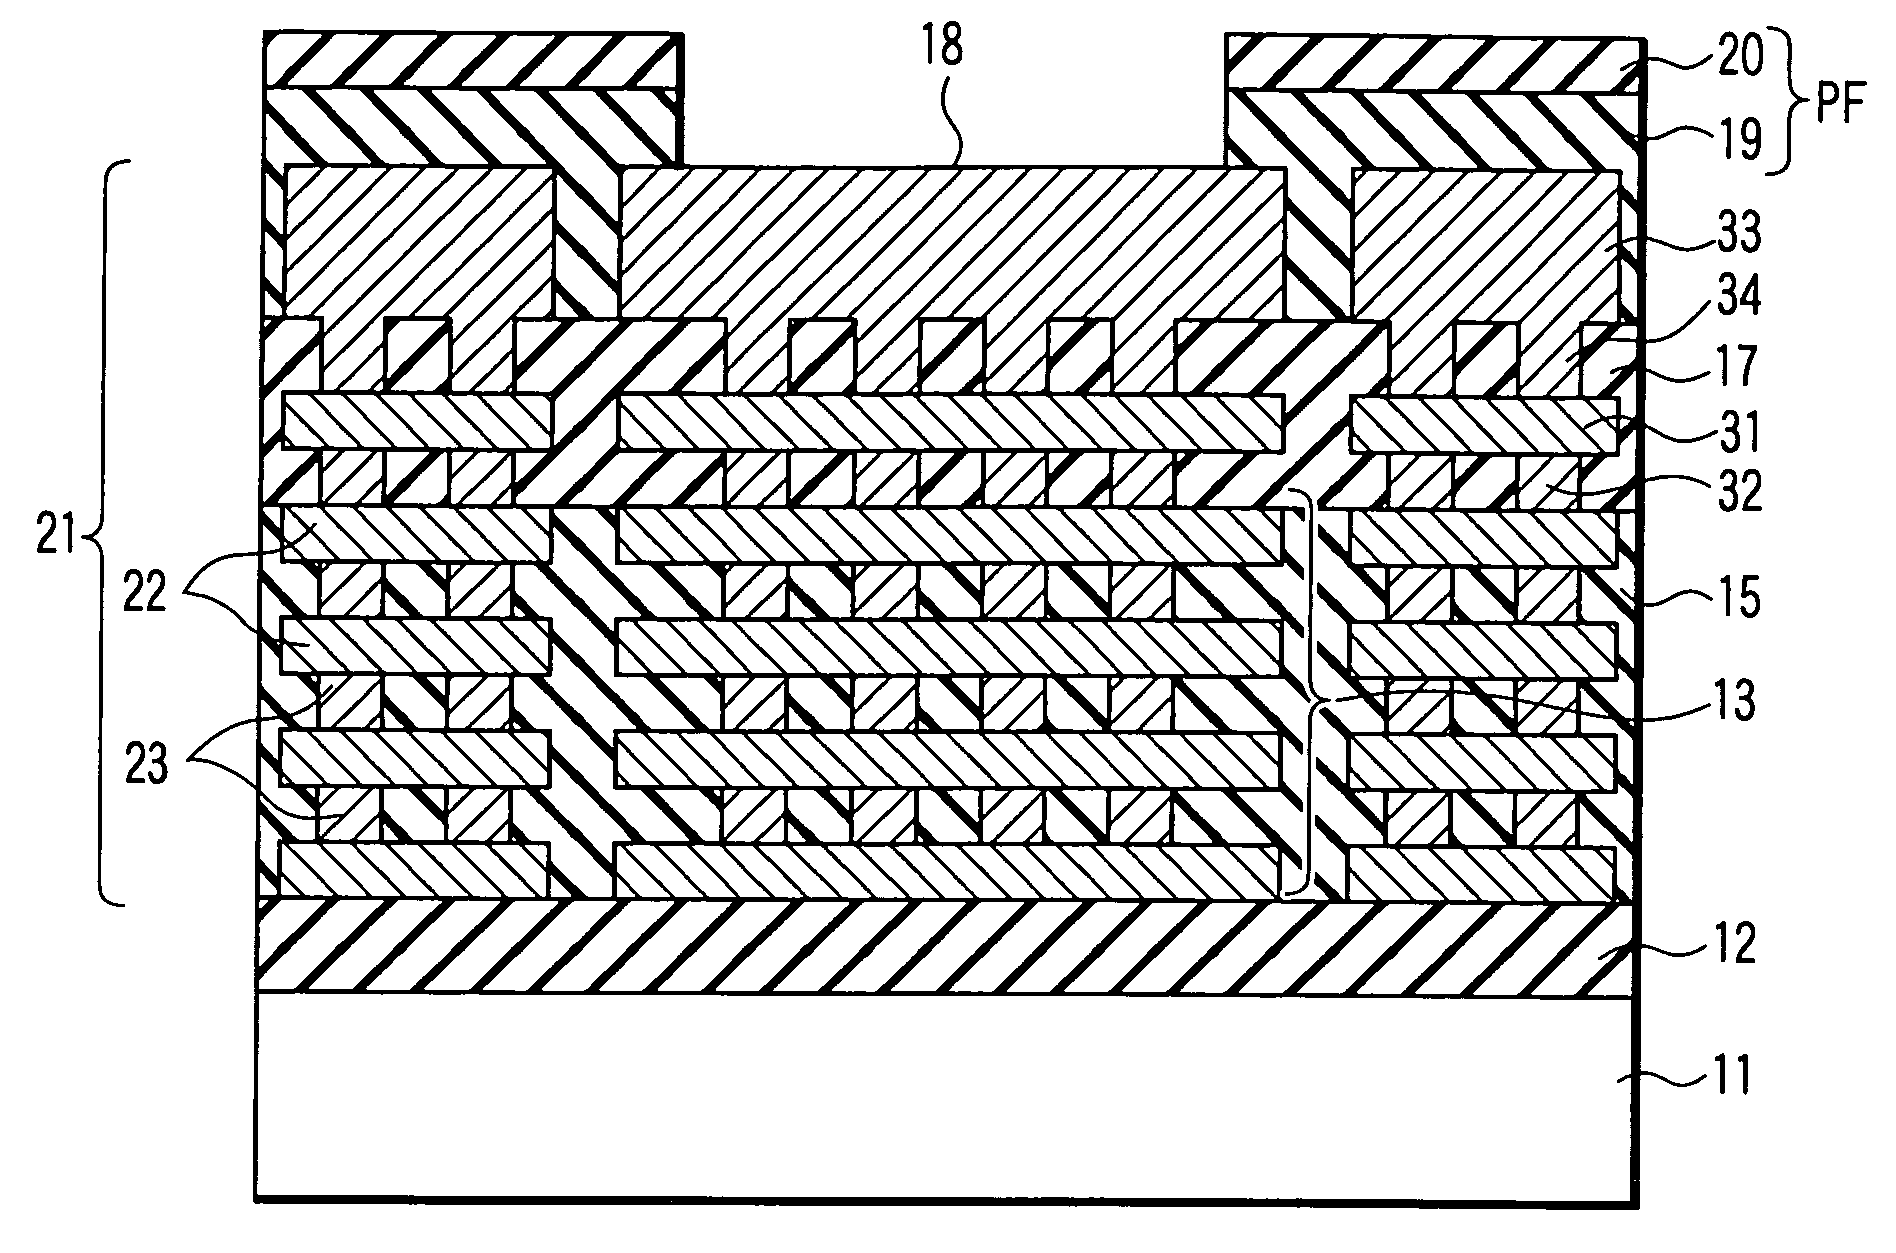 Semiconductor device using insulating film of low dielectric constant as interlayer insulating film